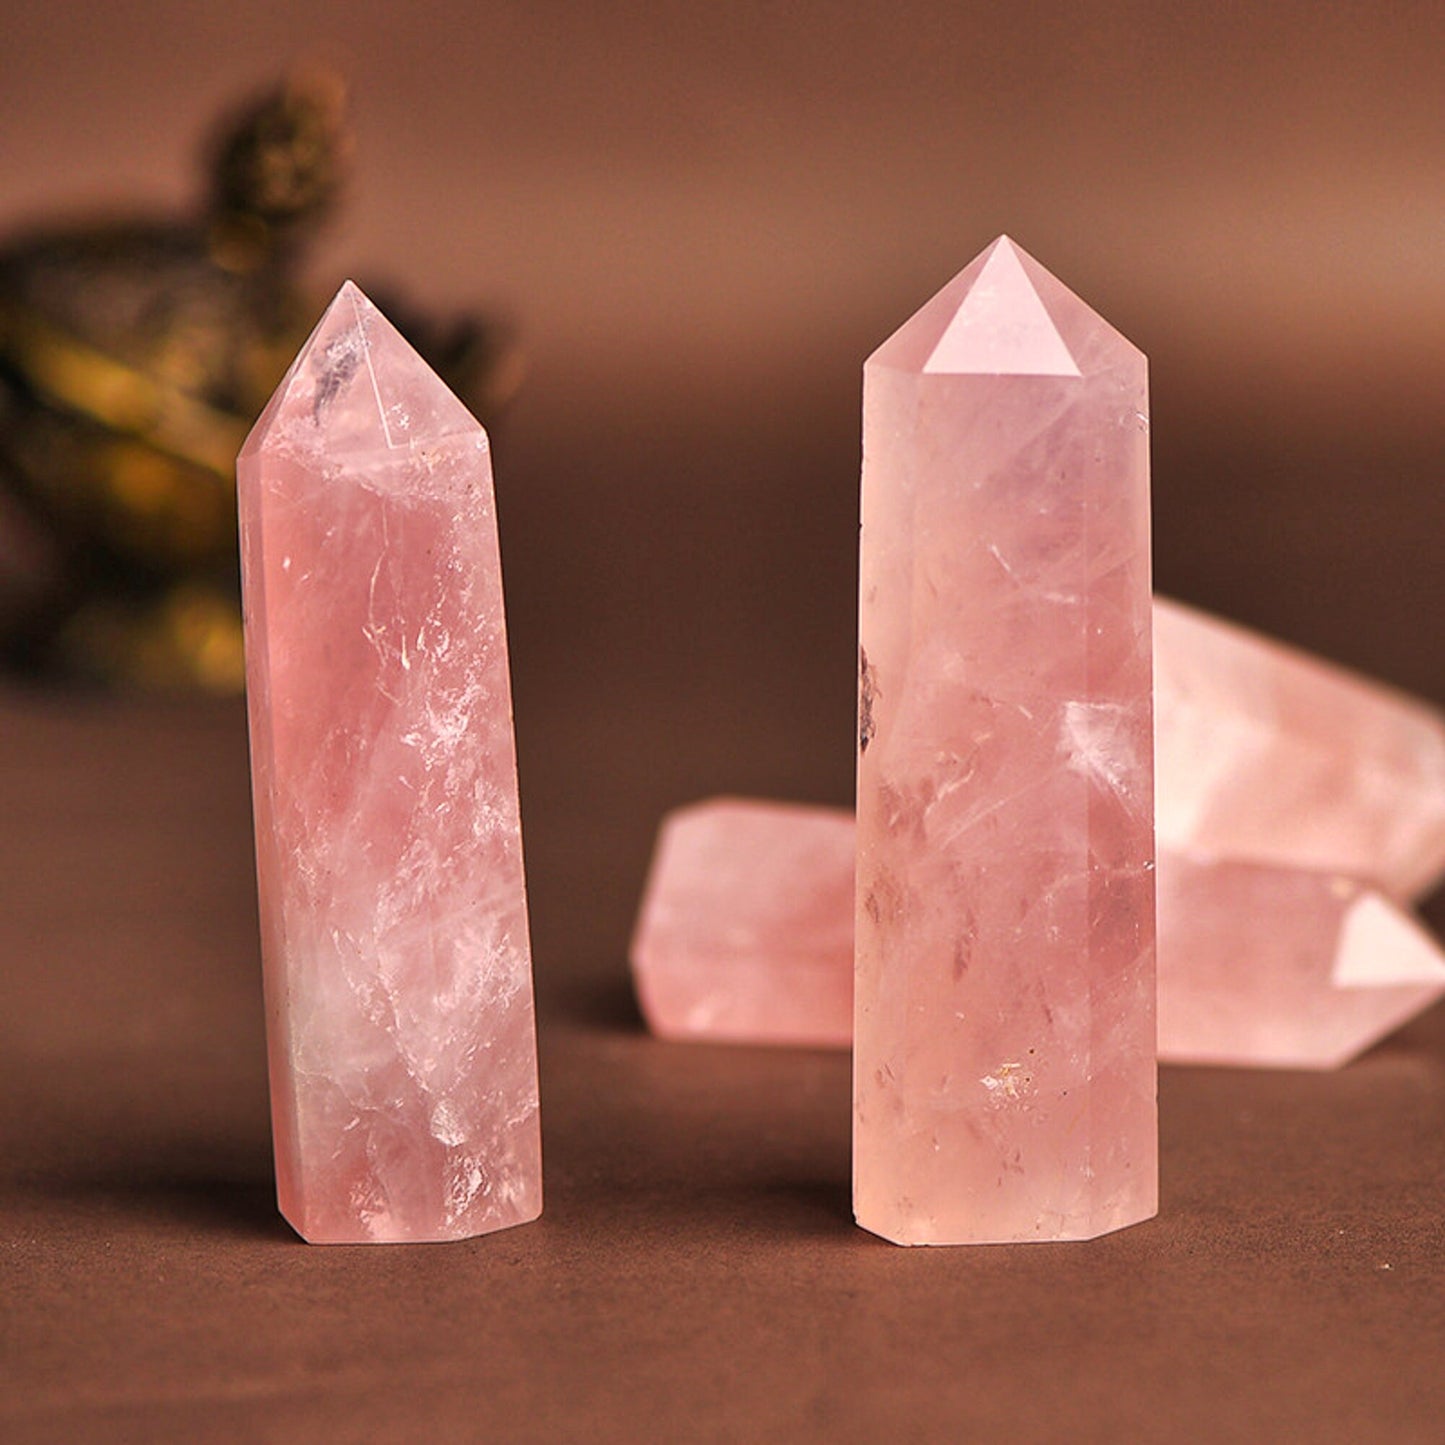 Natural Rose Quartz Crystal Wand Point - Healing Mineral Stone for DIY Home Decor and Treatment